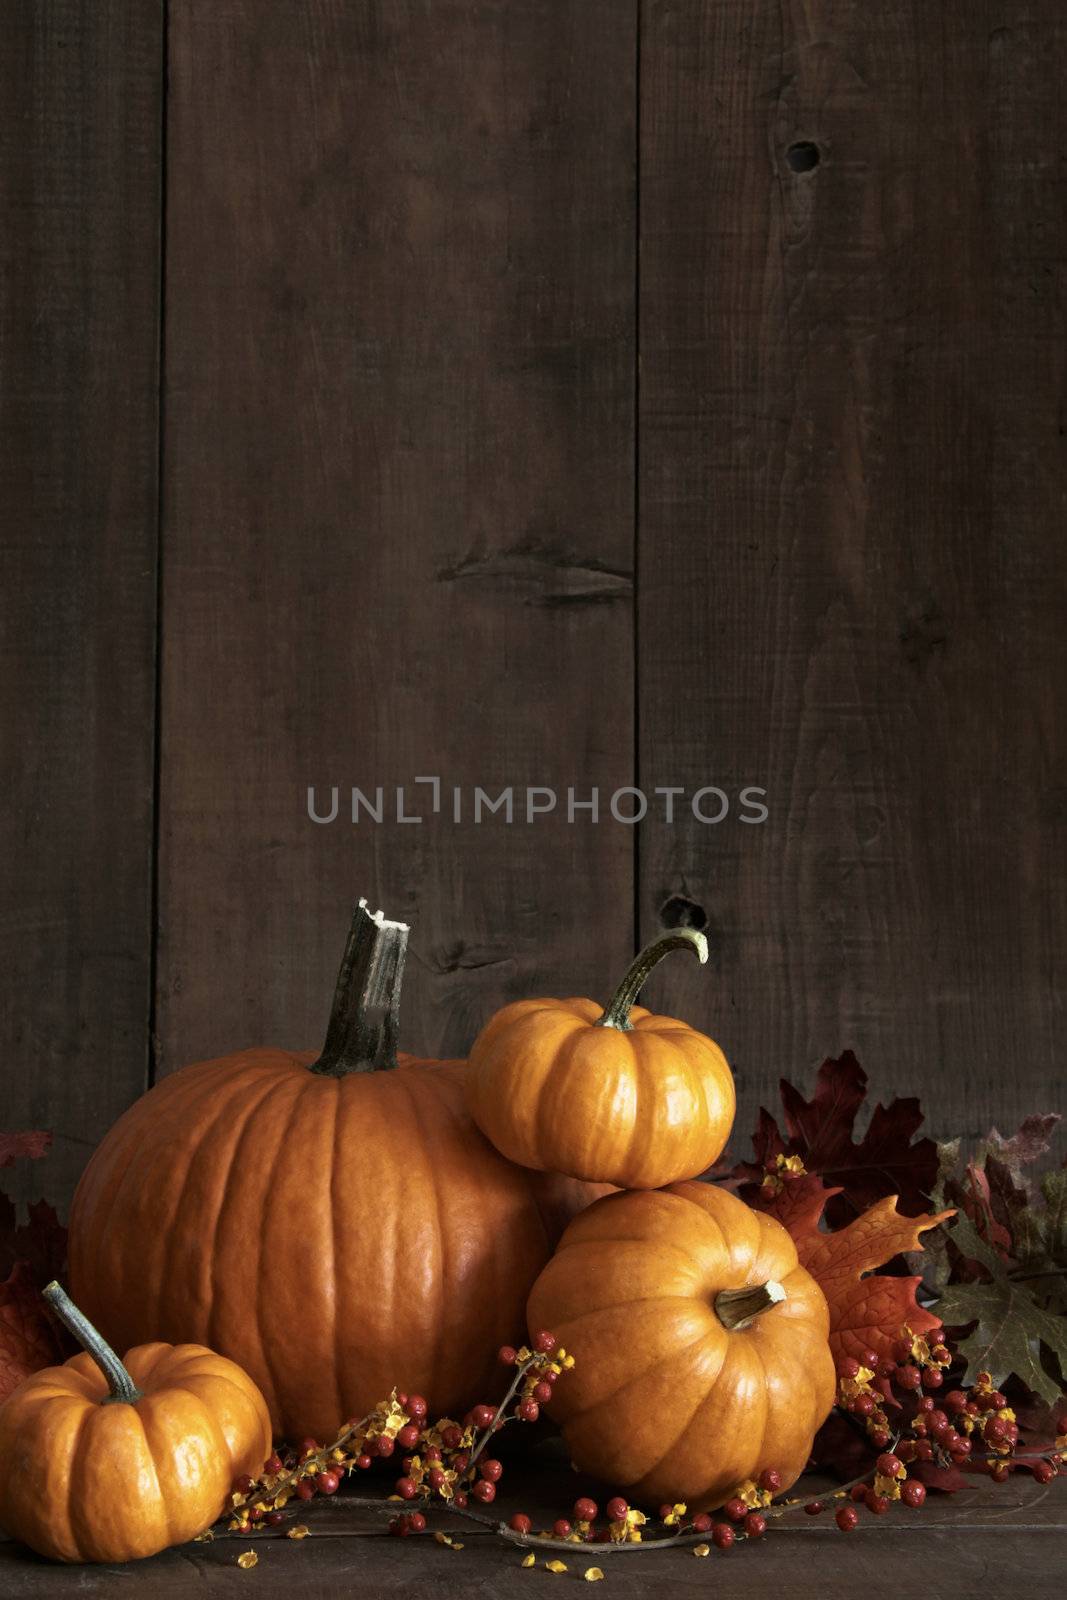 Group of gourds and pumpkin against a wood background by Sandralise